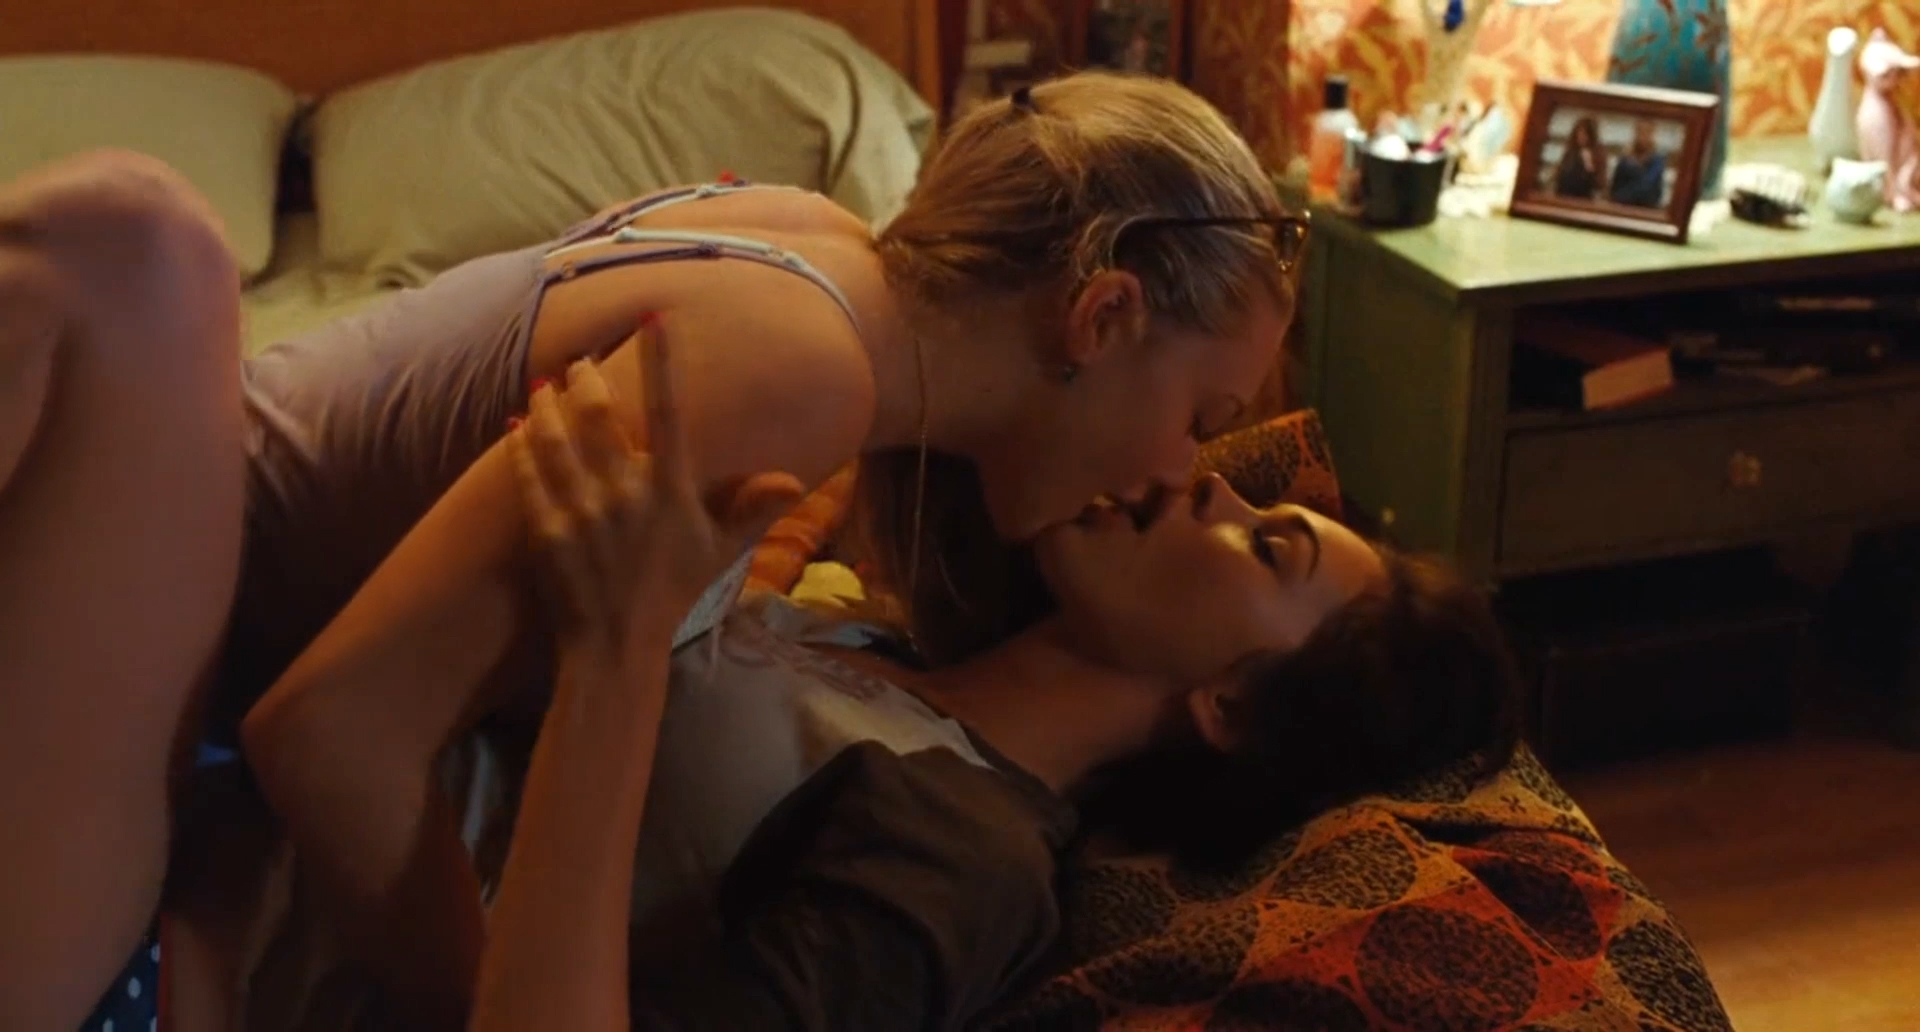 Amanda Seyfried (23 years) and Megan Fox (22 years) in sexy scenes from hor...